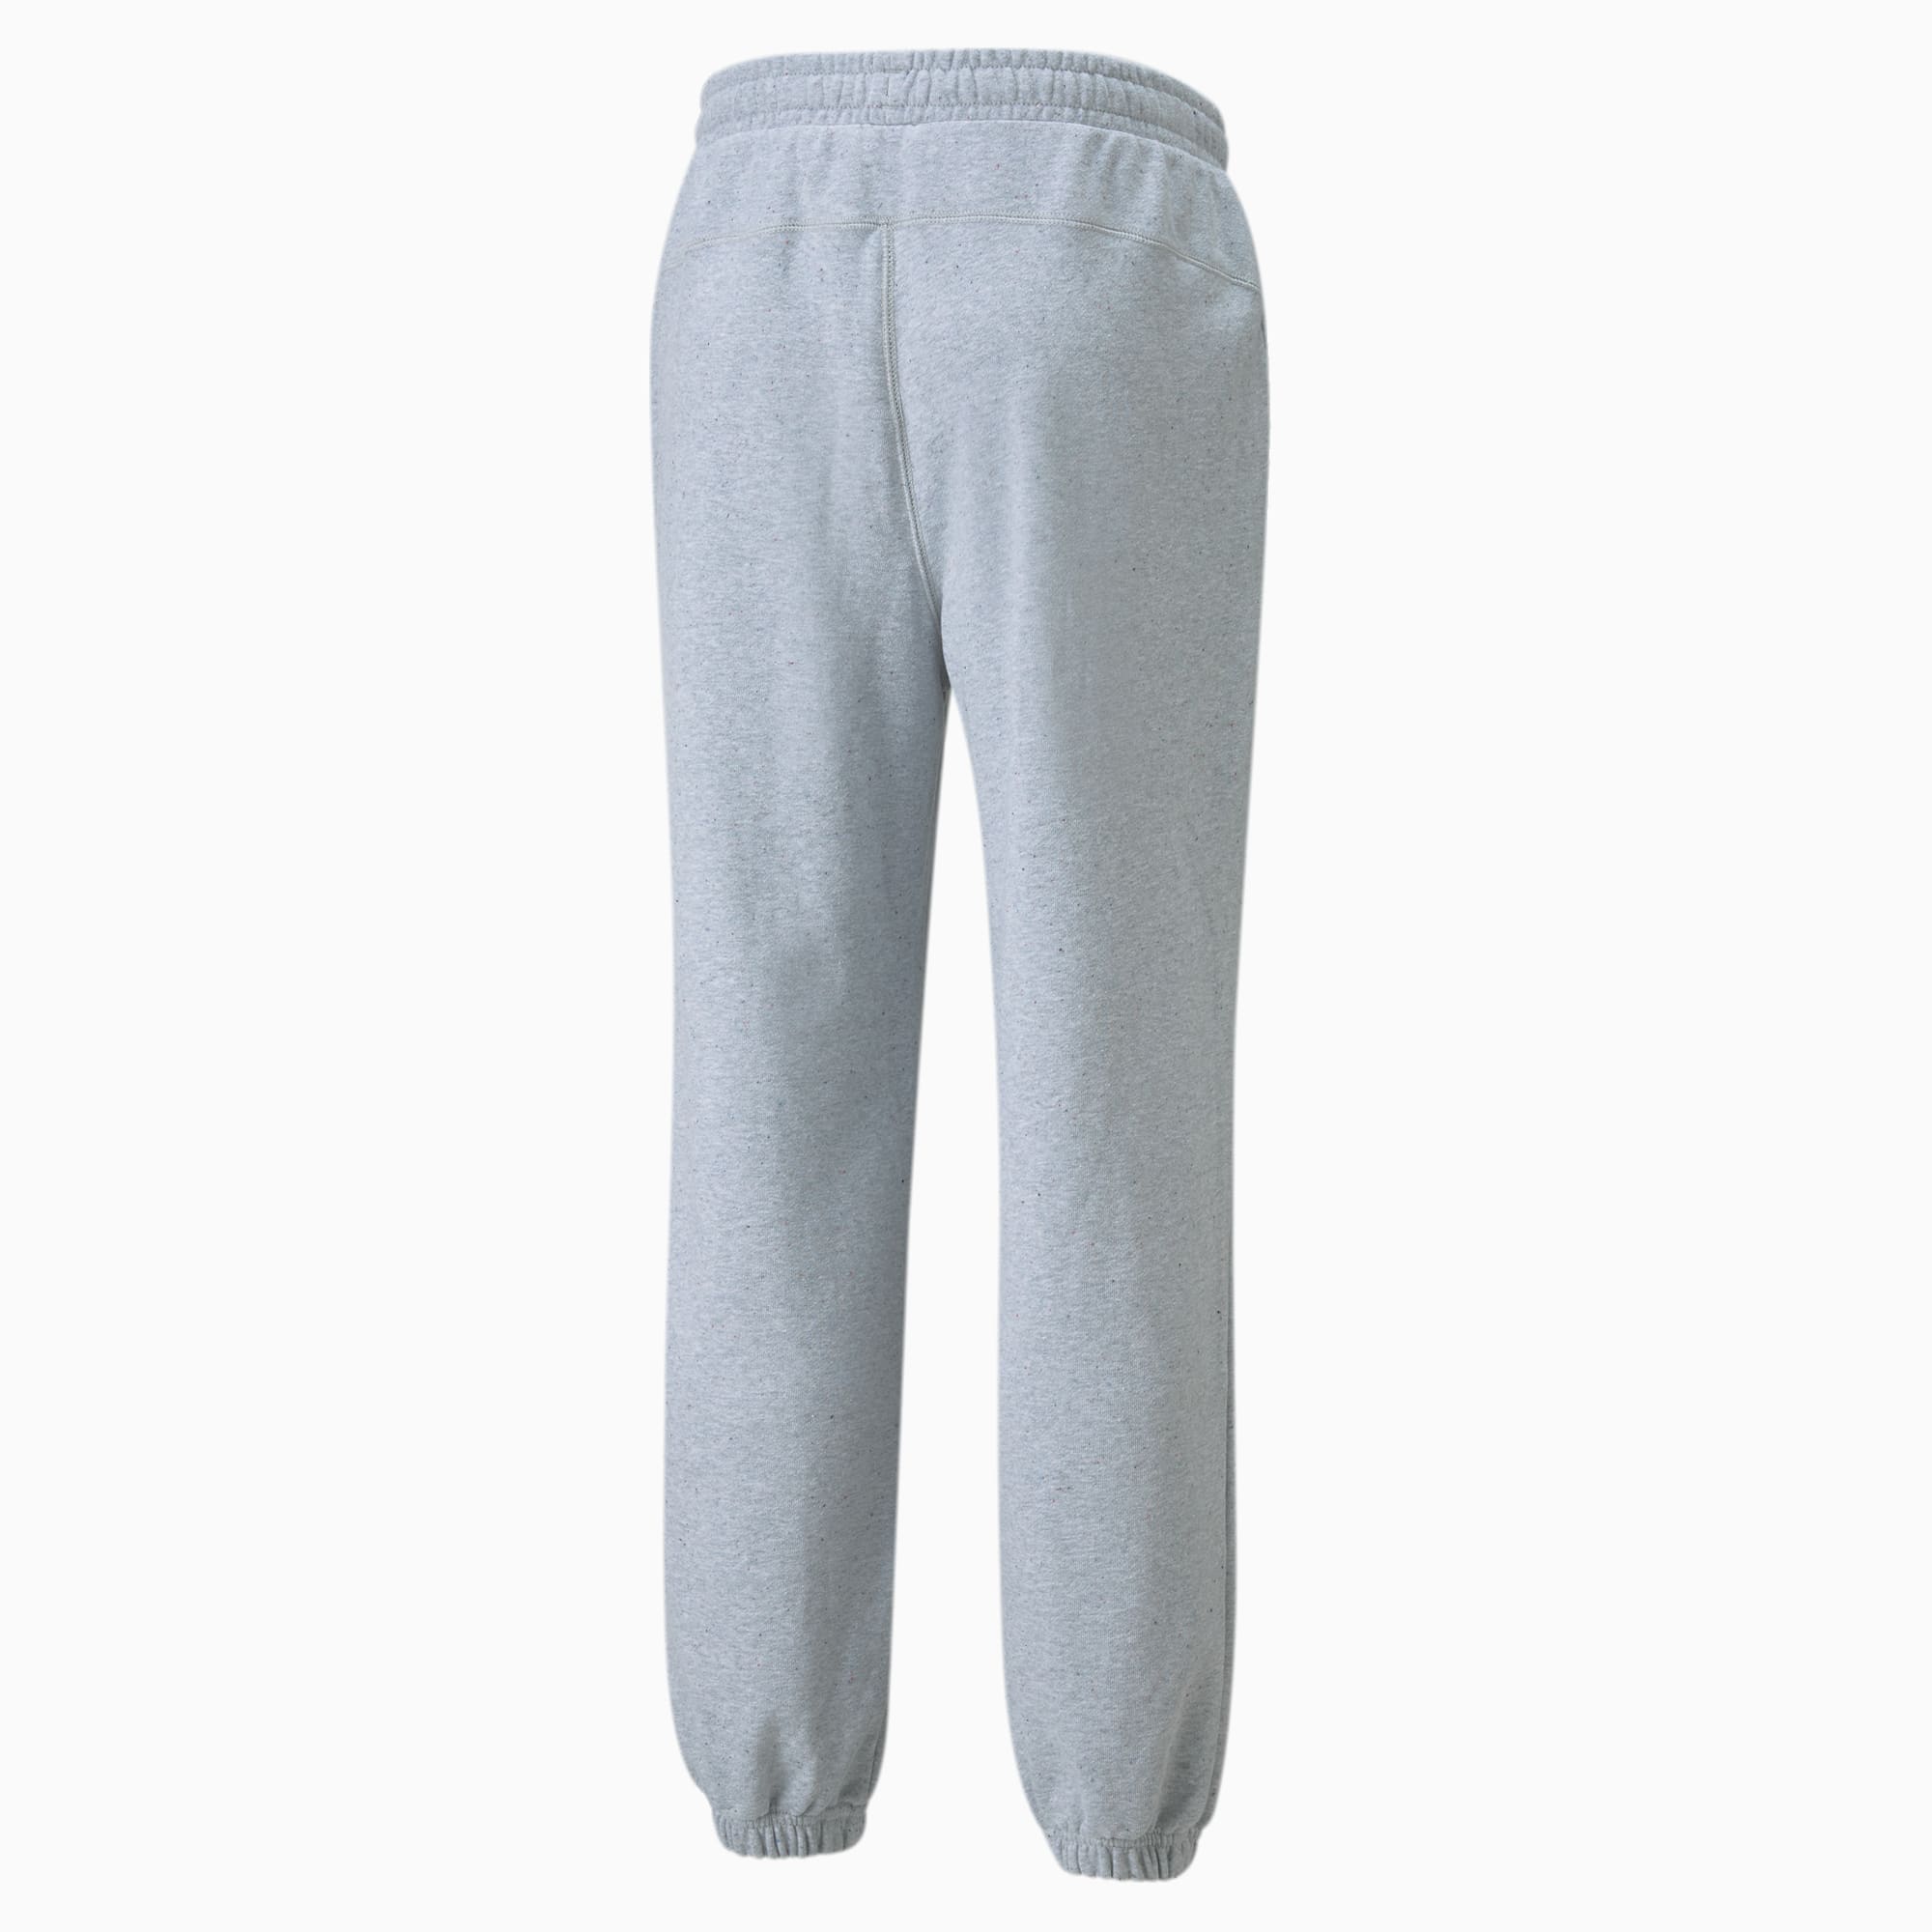 RE:Collection Relaxed Men's Pants | PUMA